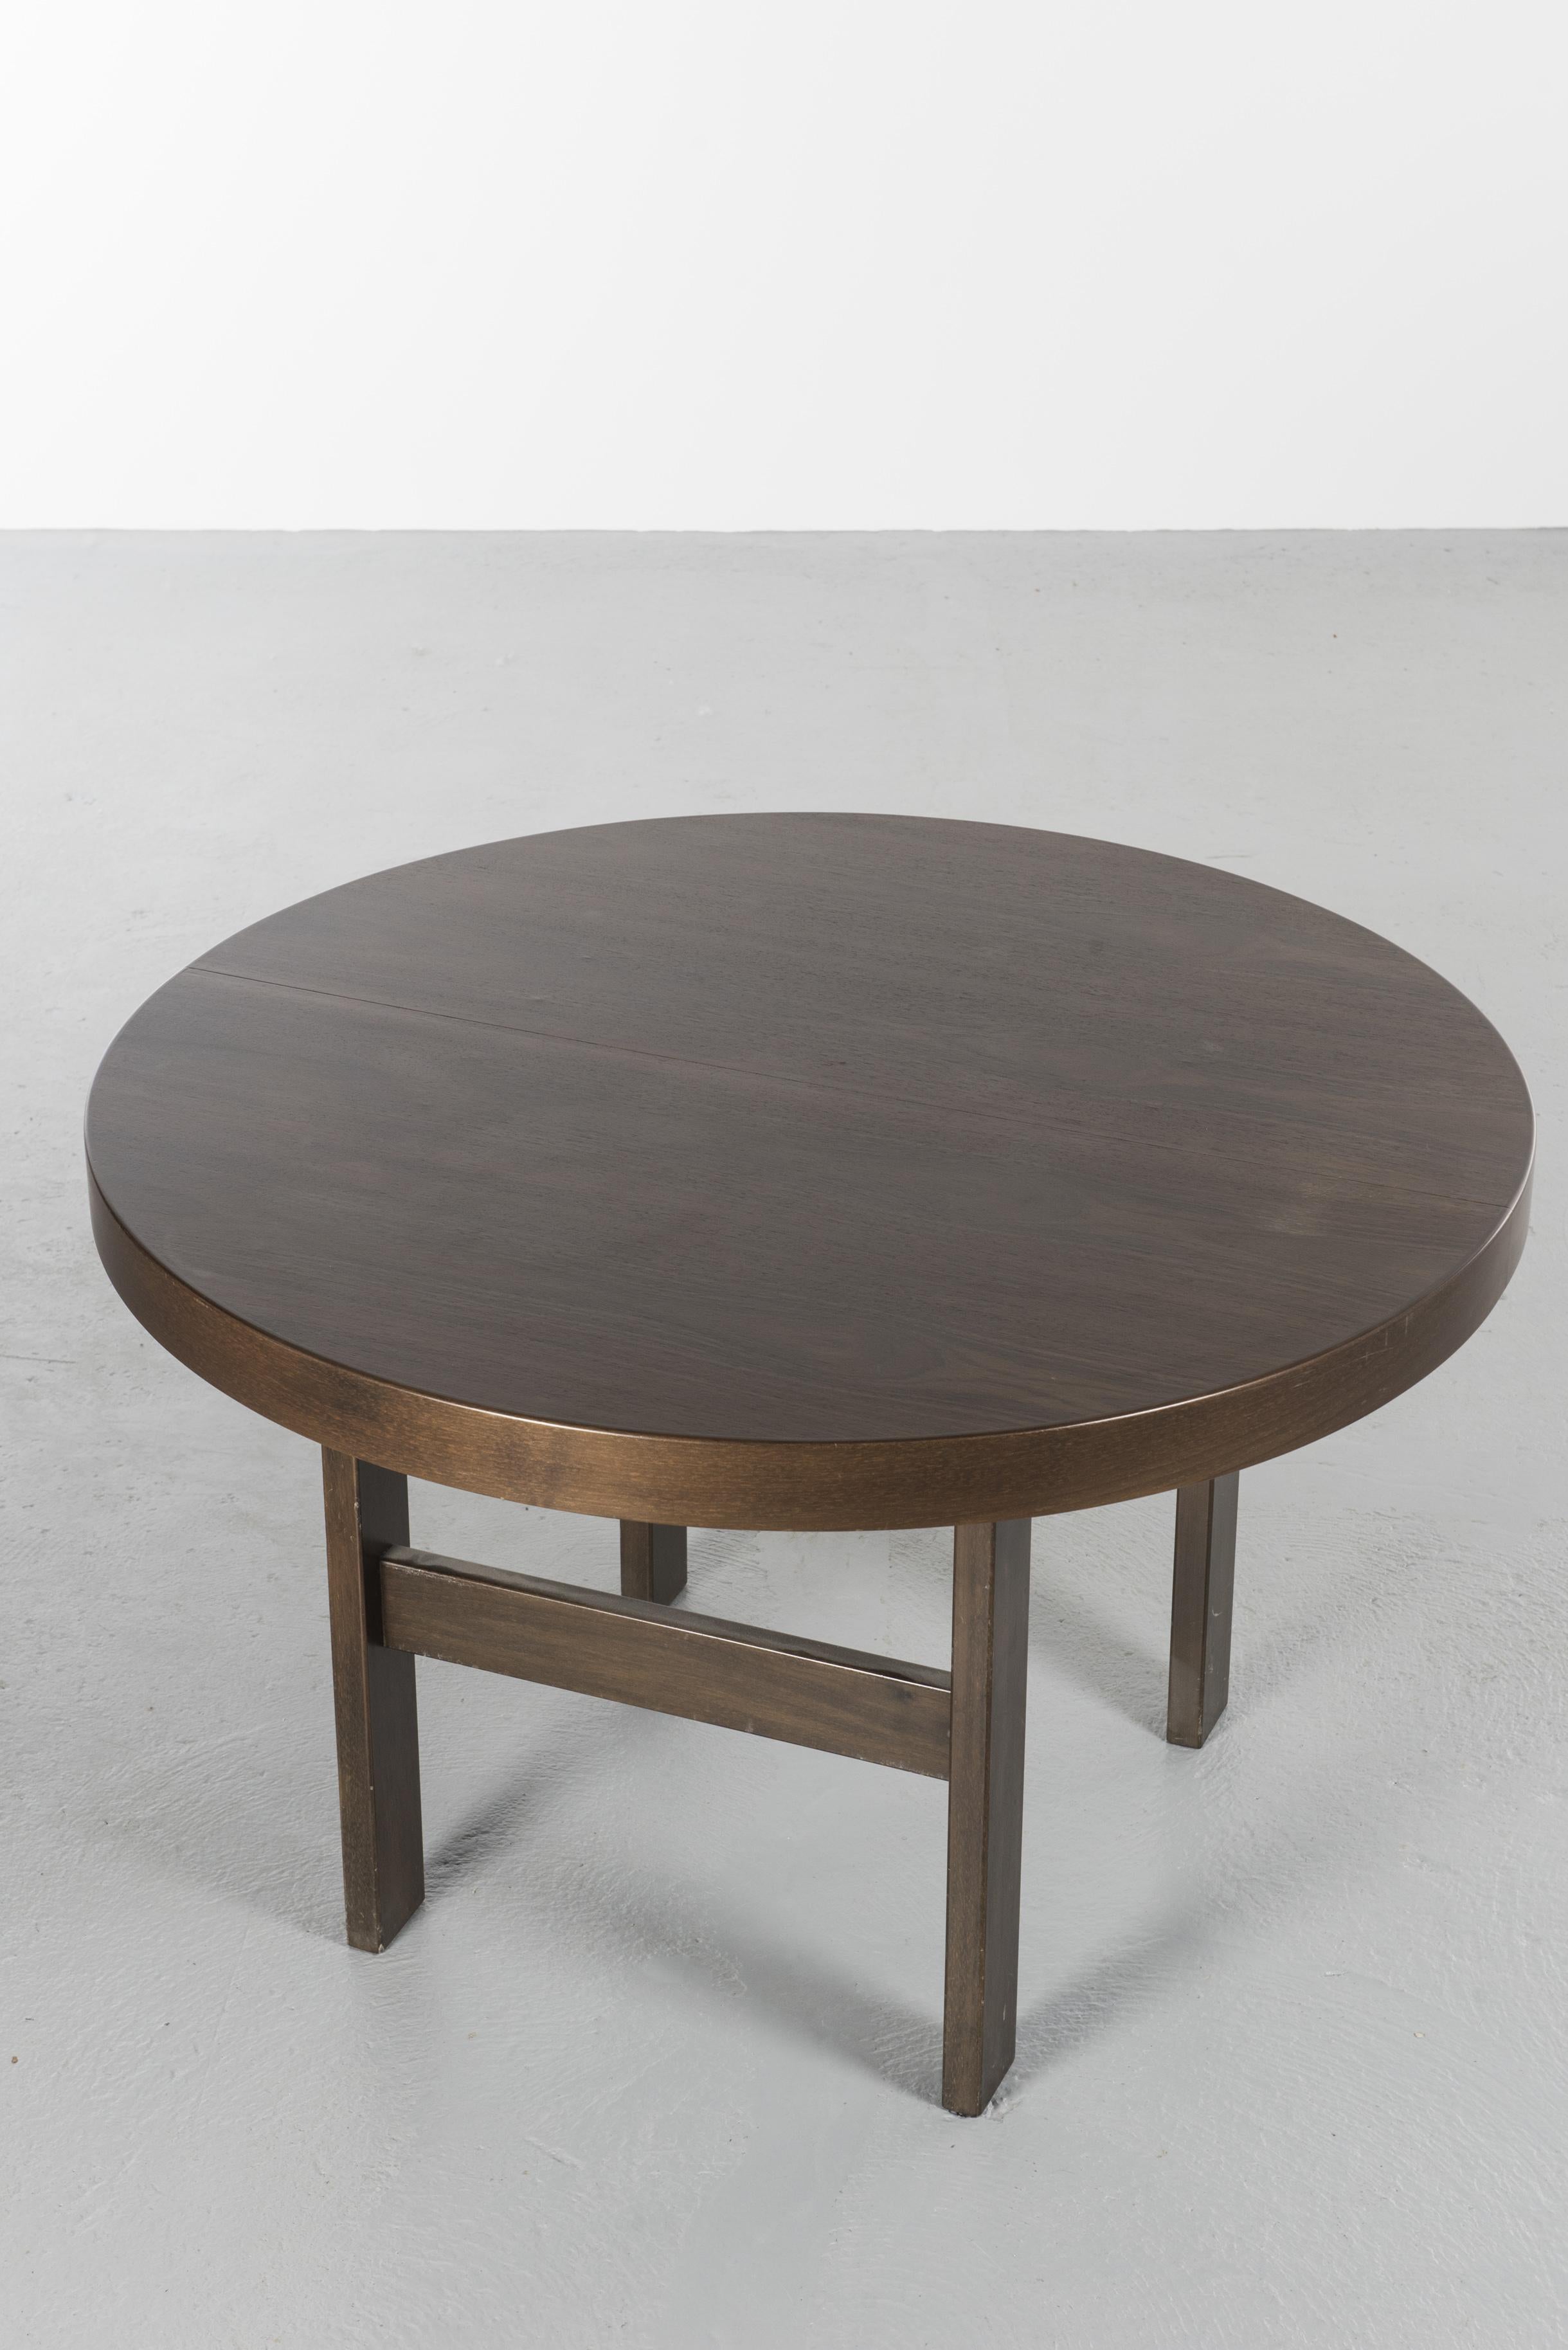 Round/Oval Table with Extension Leaves in Veneered Oak, Black Stained, 1960s For Sale 1